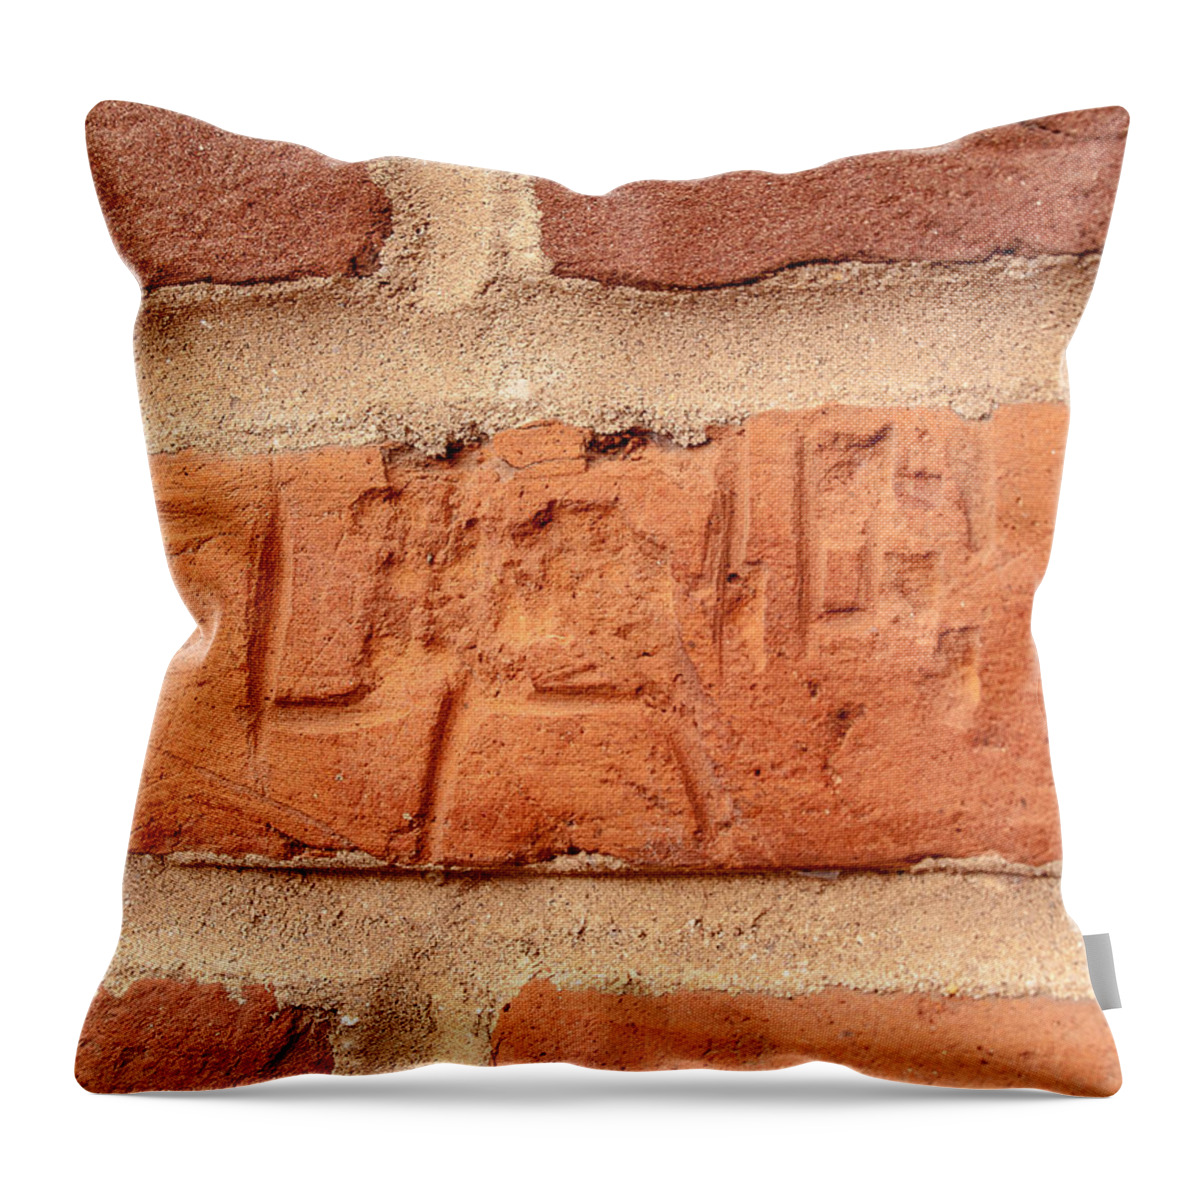 Sc State Hospital Throw Pillow featuring the photograph Just Another Brick in the Wall by Charles Hite